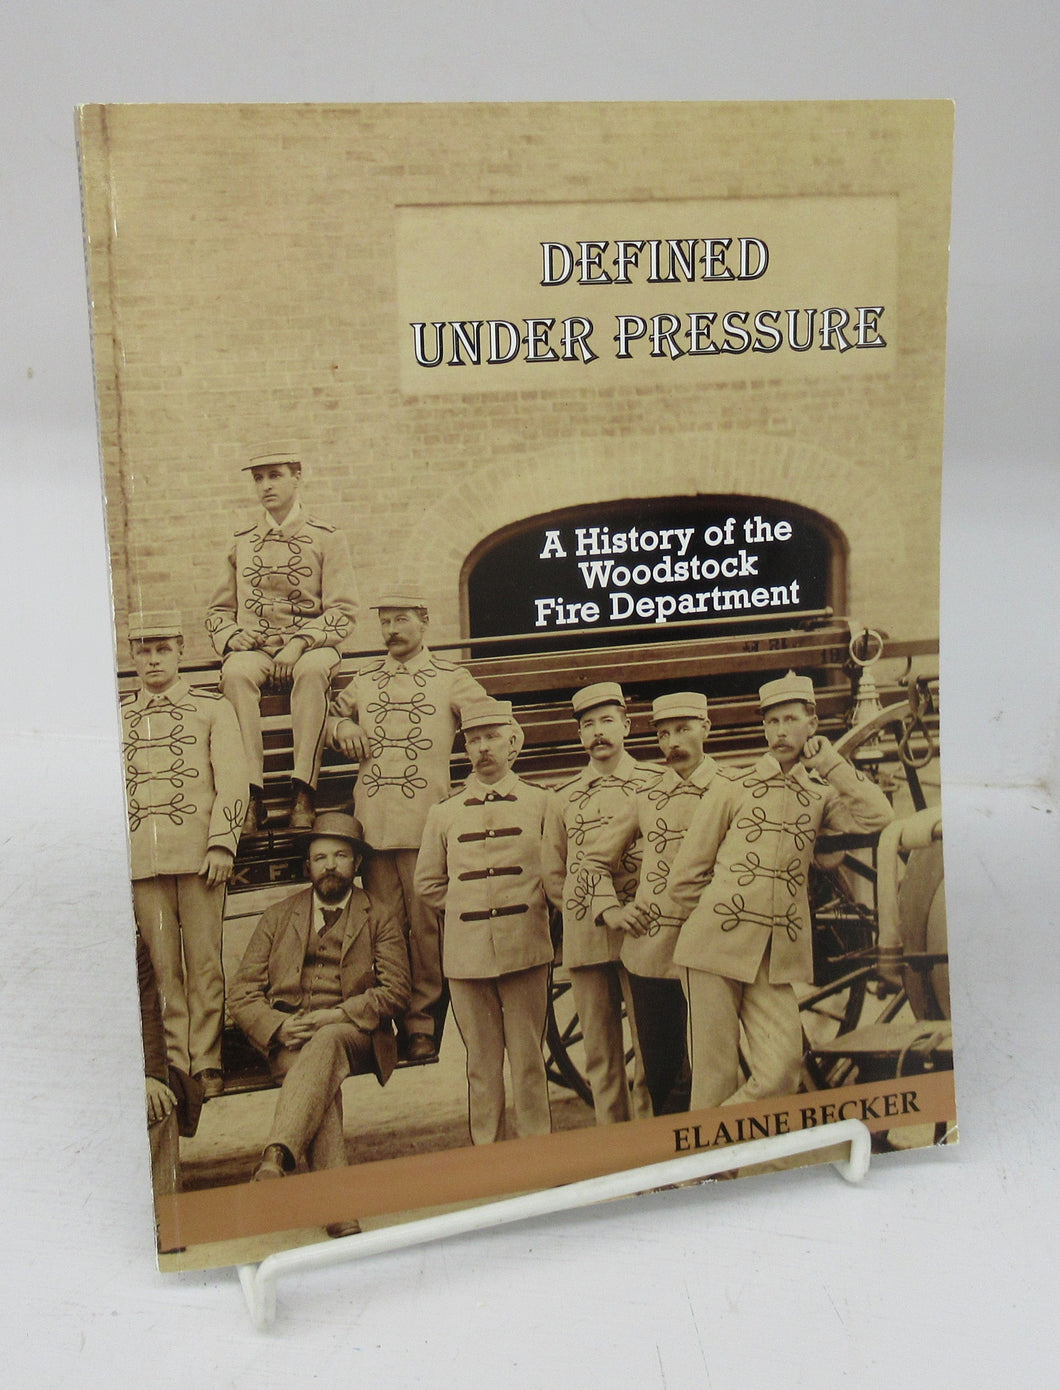 Defined Under Pressure: A History of the Woodstock Fire Department